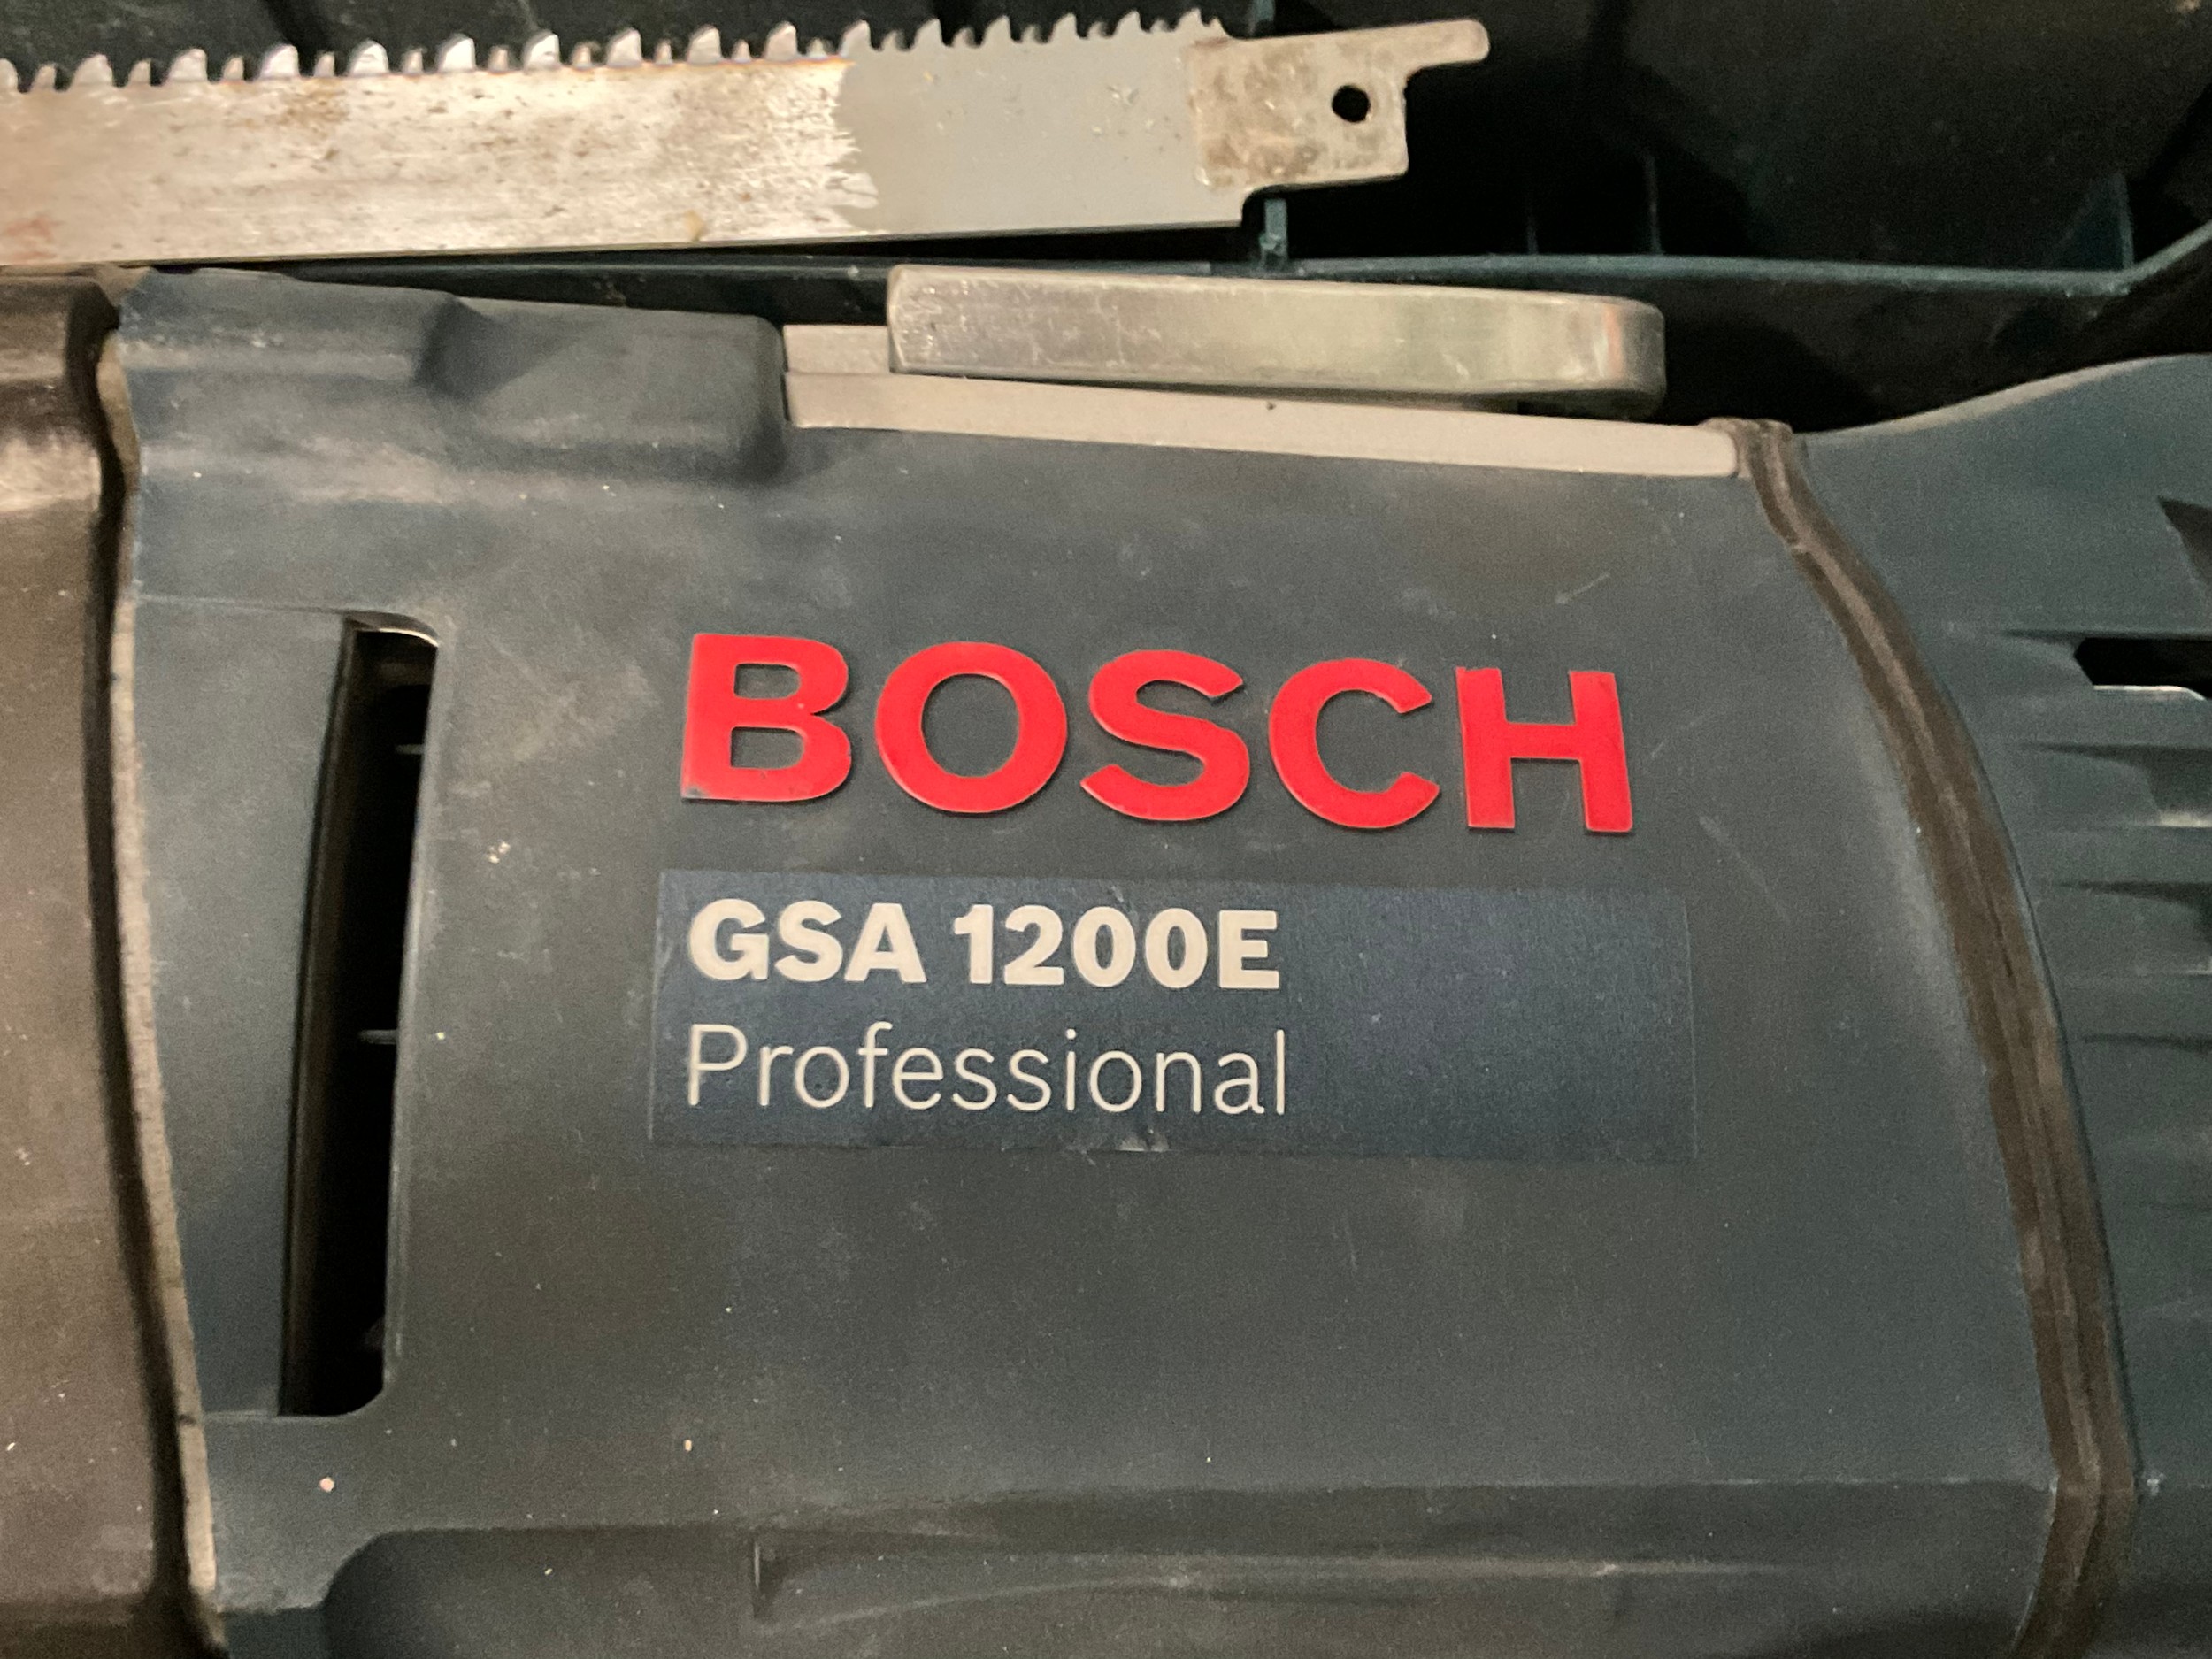 Bosch GSA 1200 power saw in case ref mb35. - Image 2 of 2